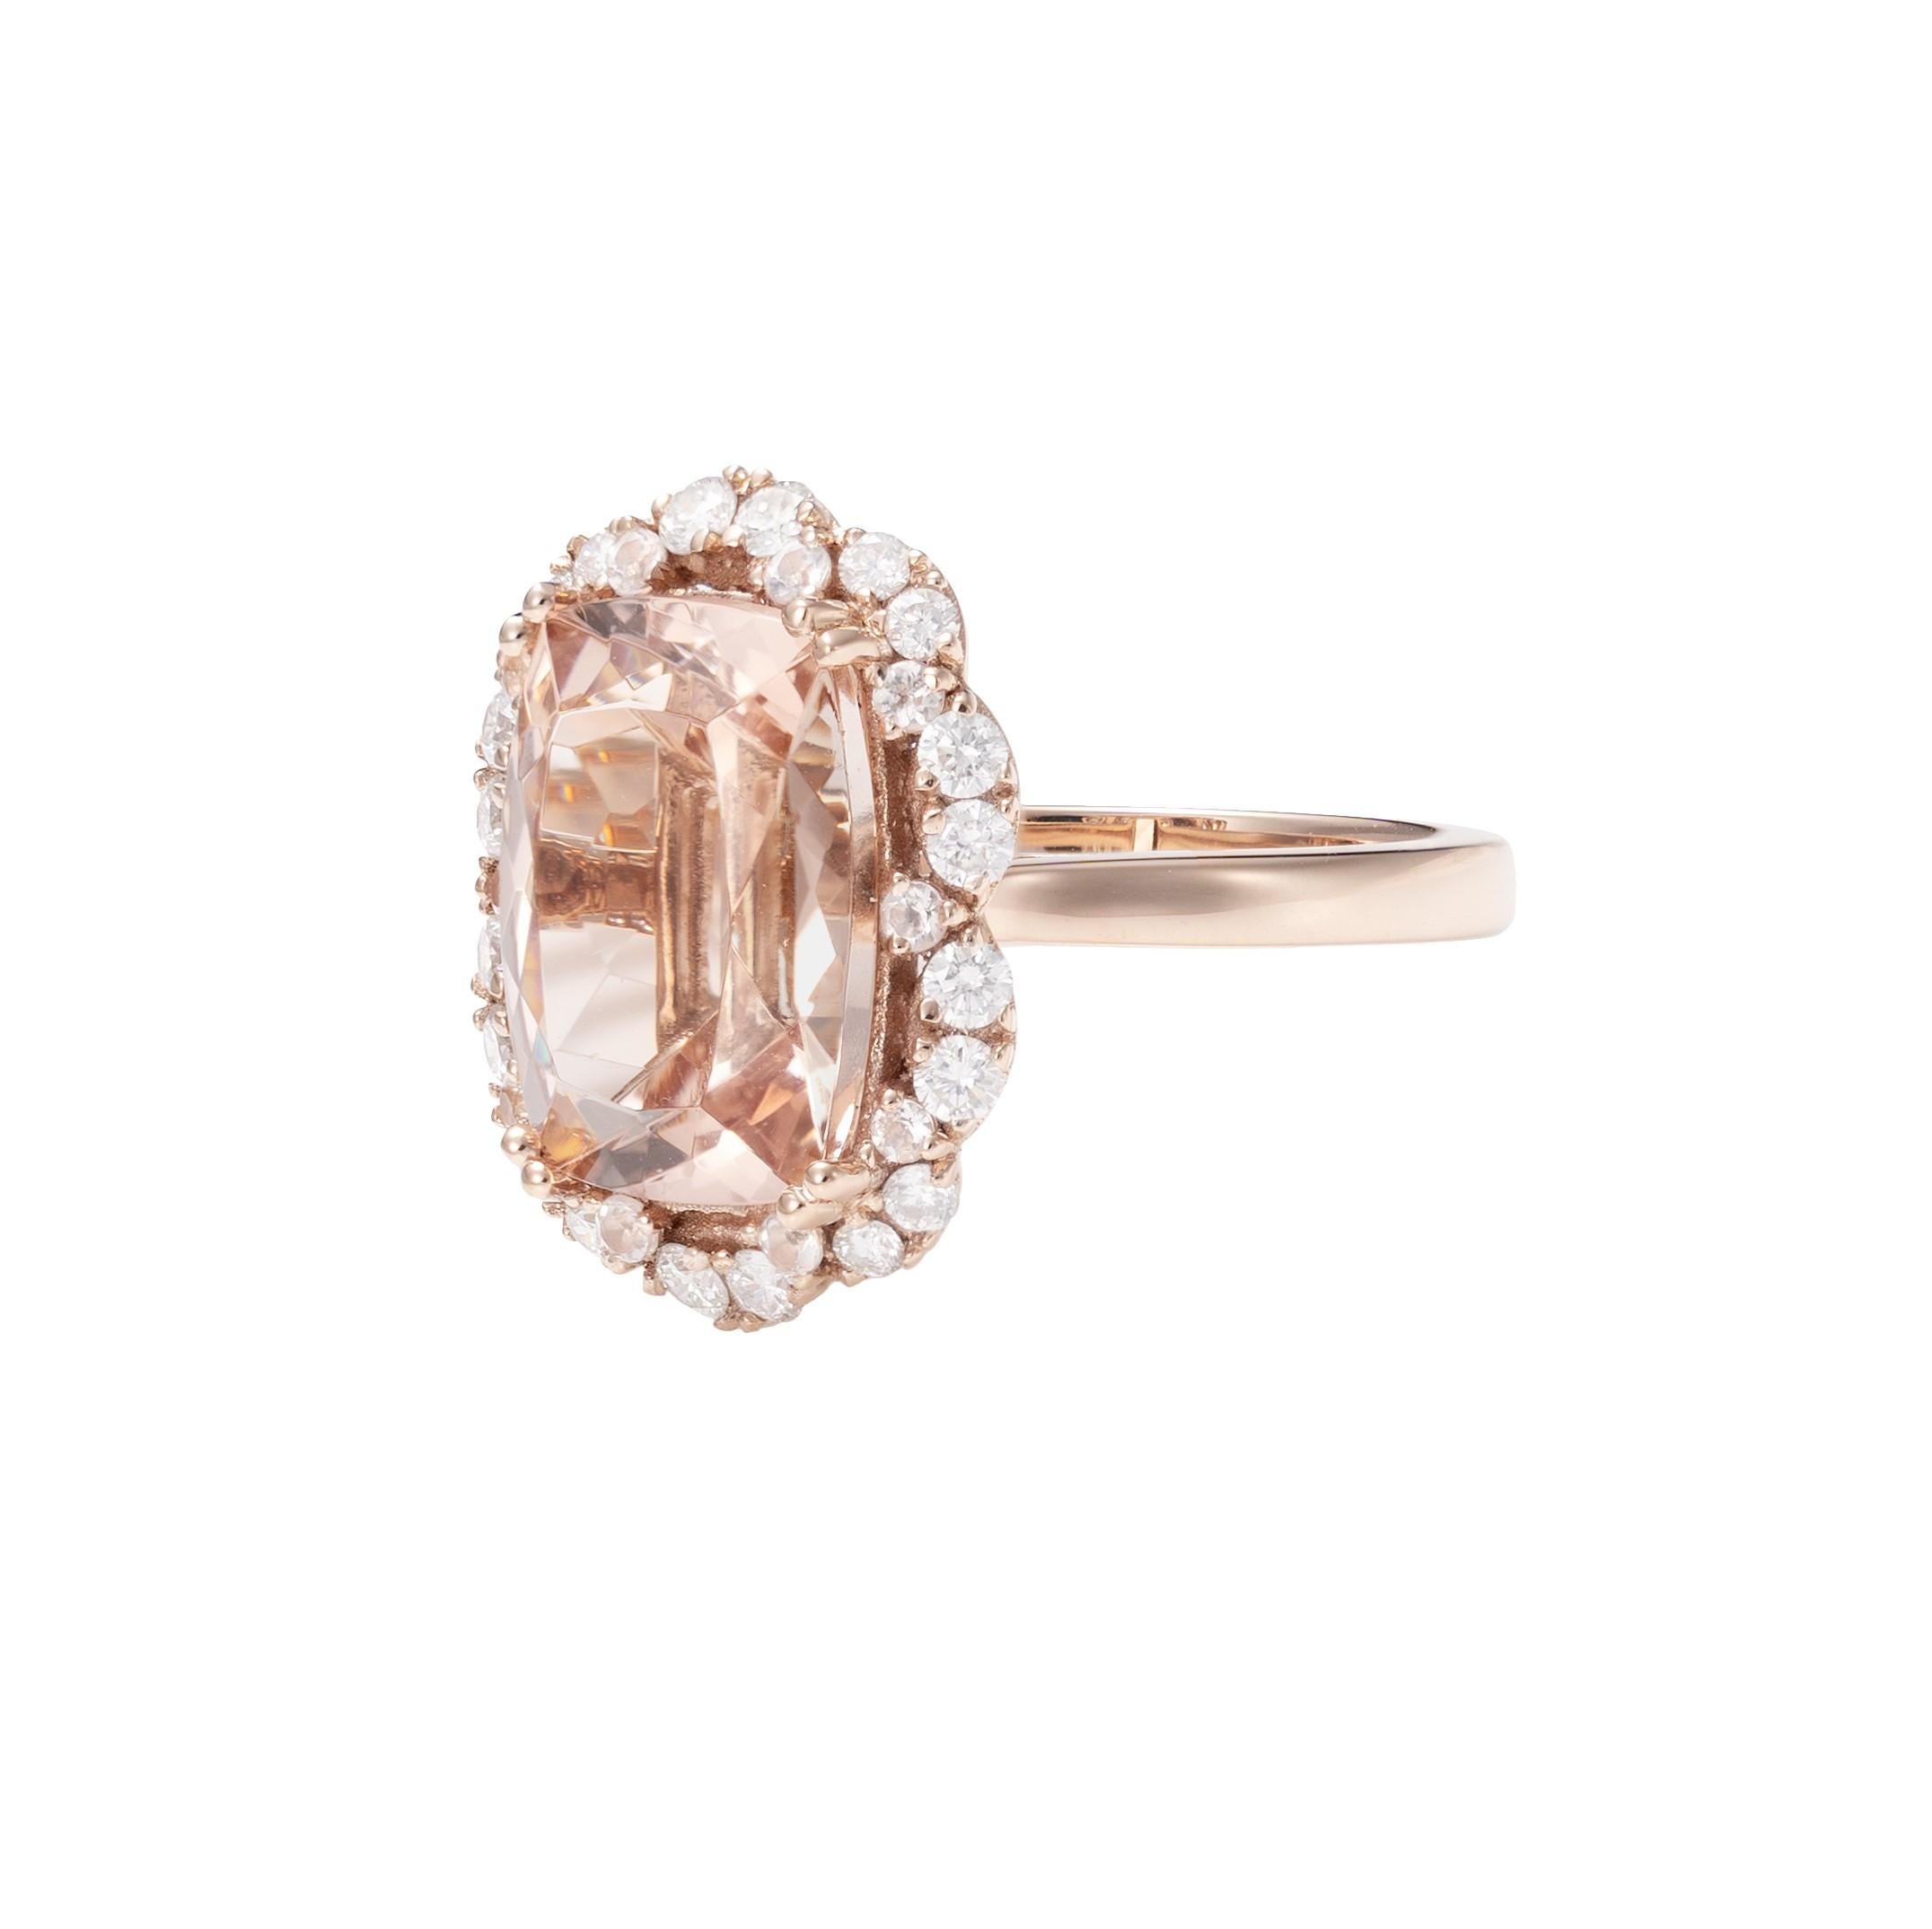 Contemporary 6.4 Carat Morganite and Diamond Ring in 18 Karat Rose Gold For Sale